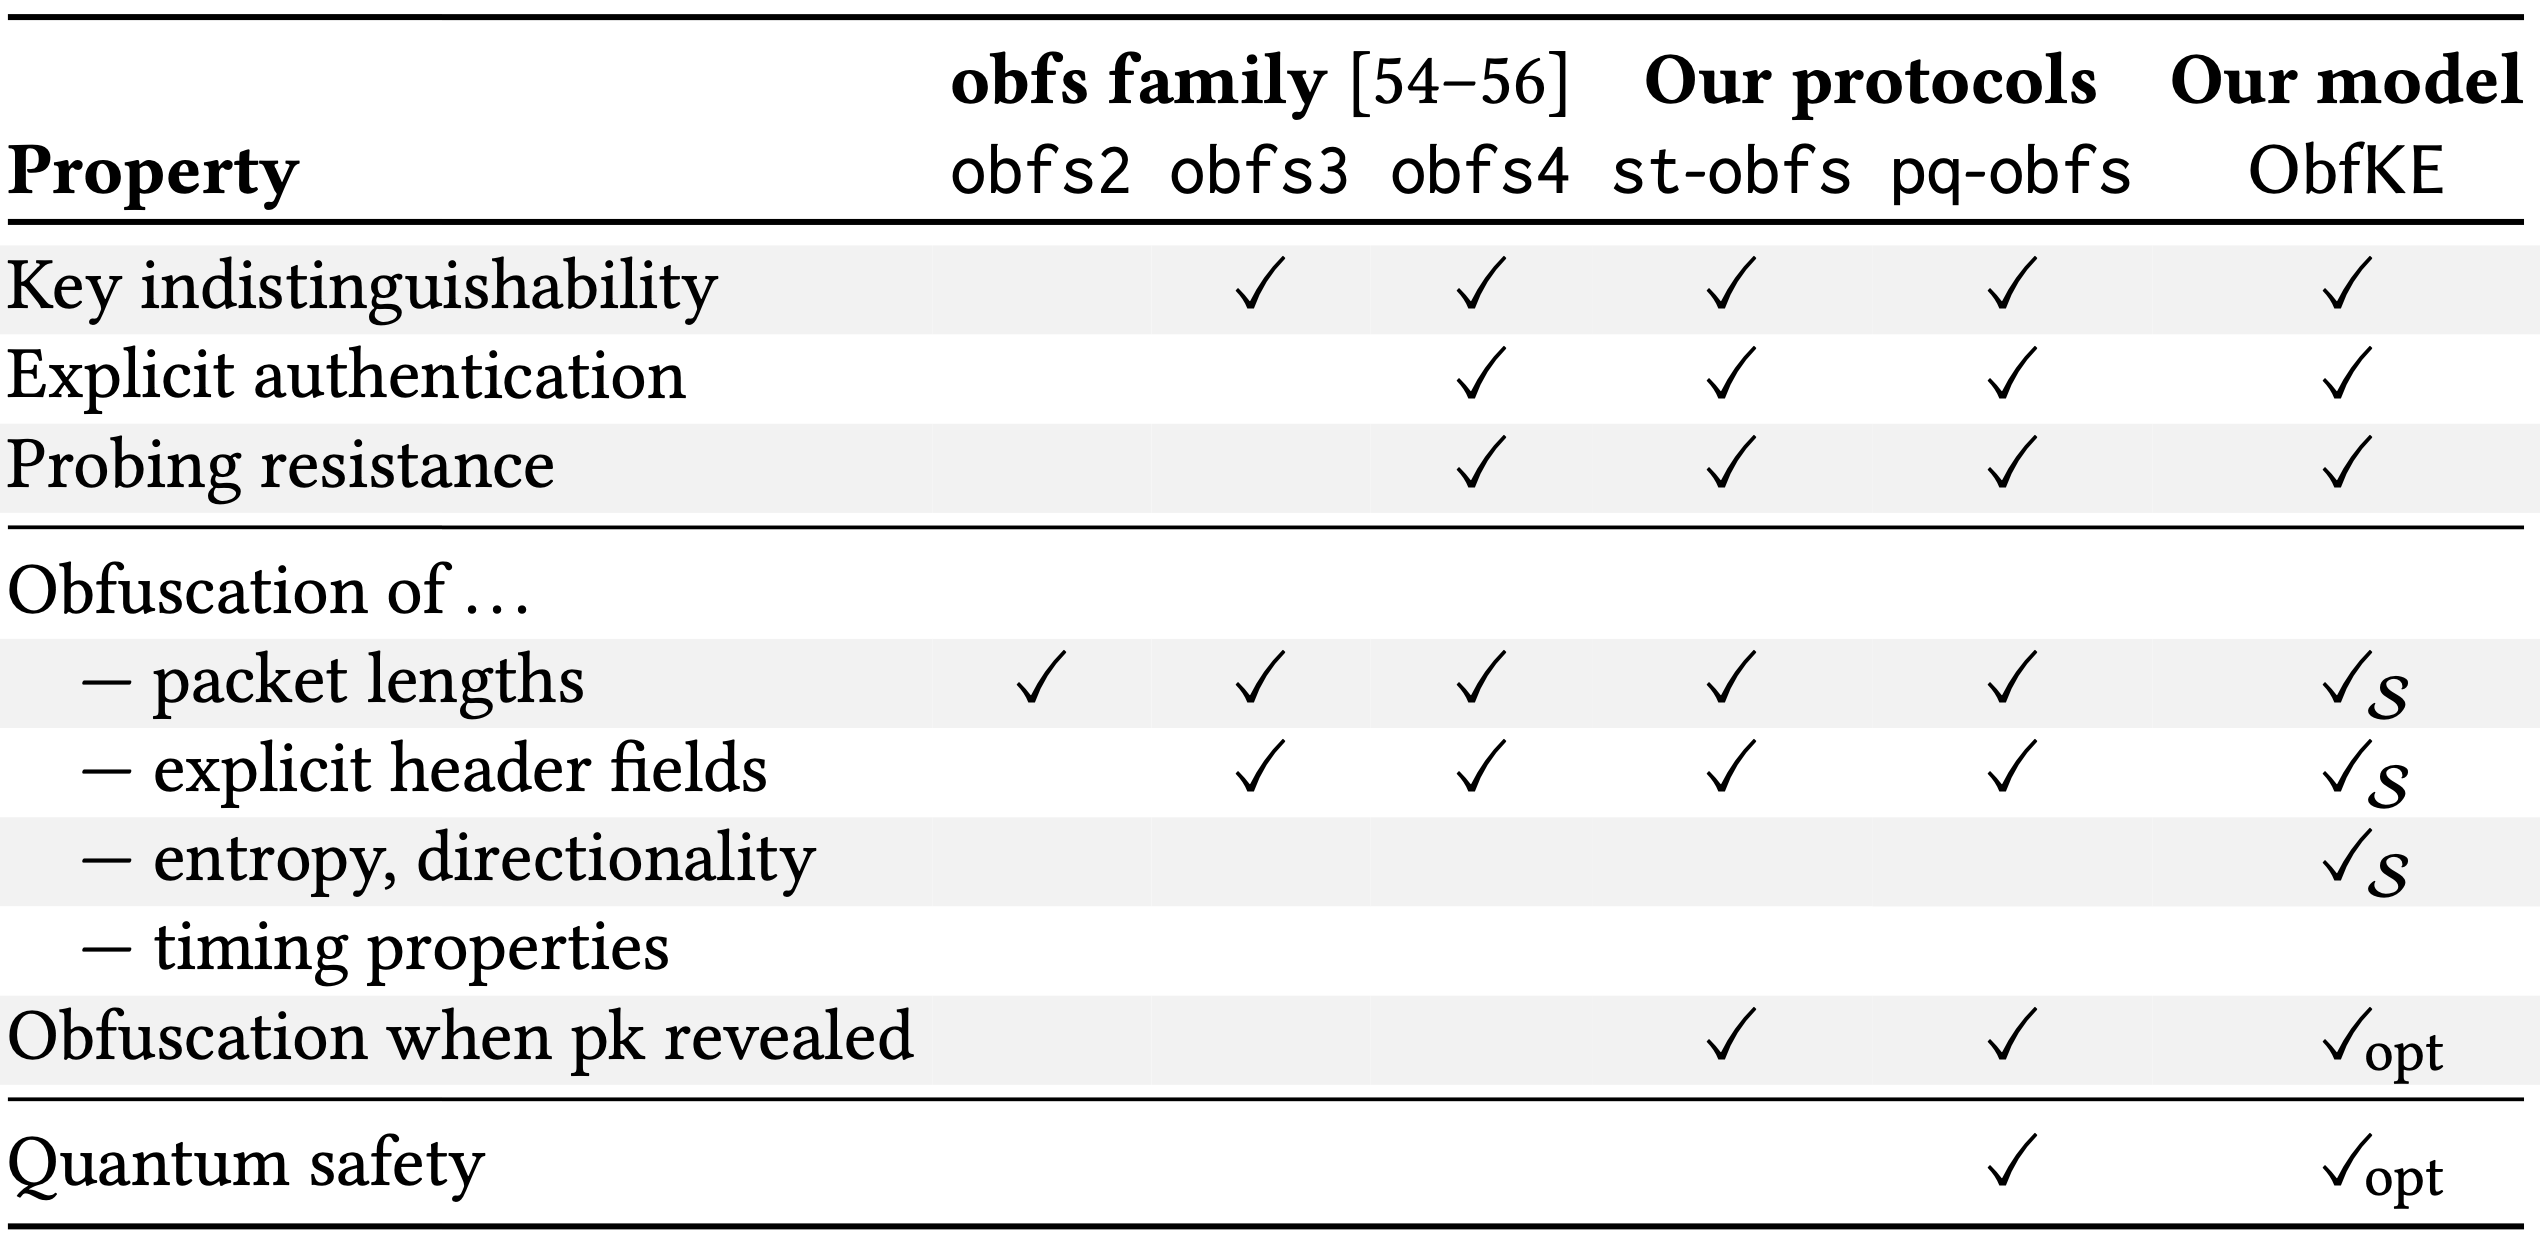 Overview of properties of obfuscated protocols